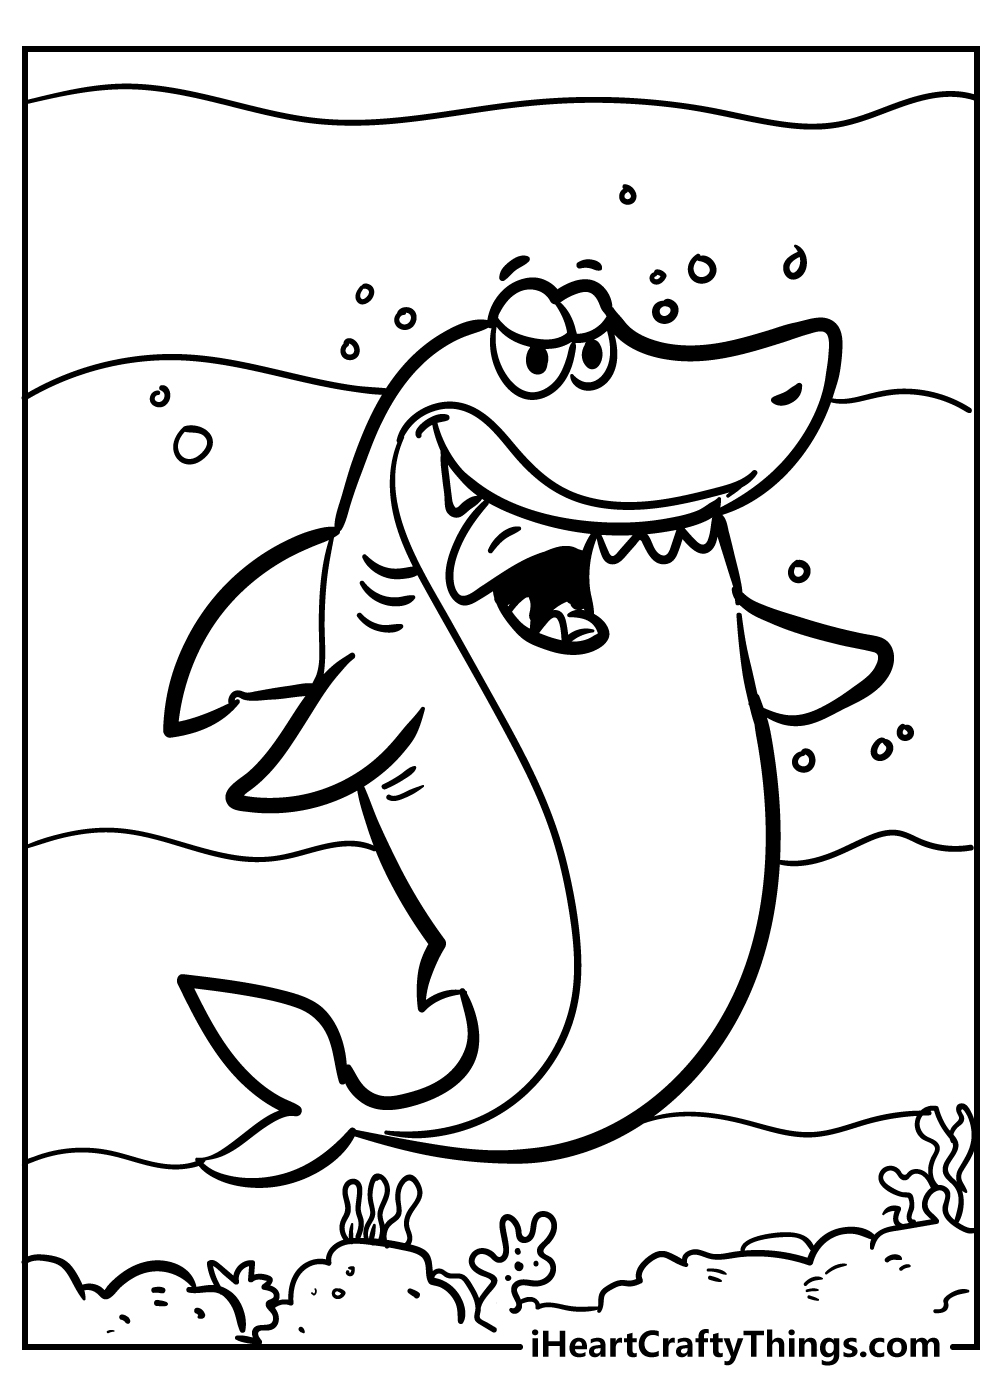 Shark coloring pages free pdf download